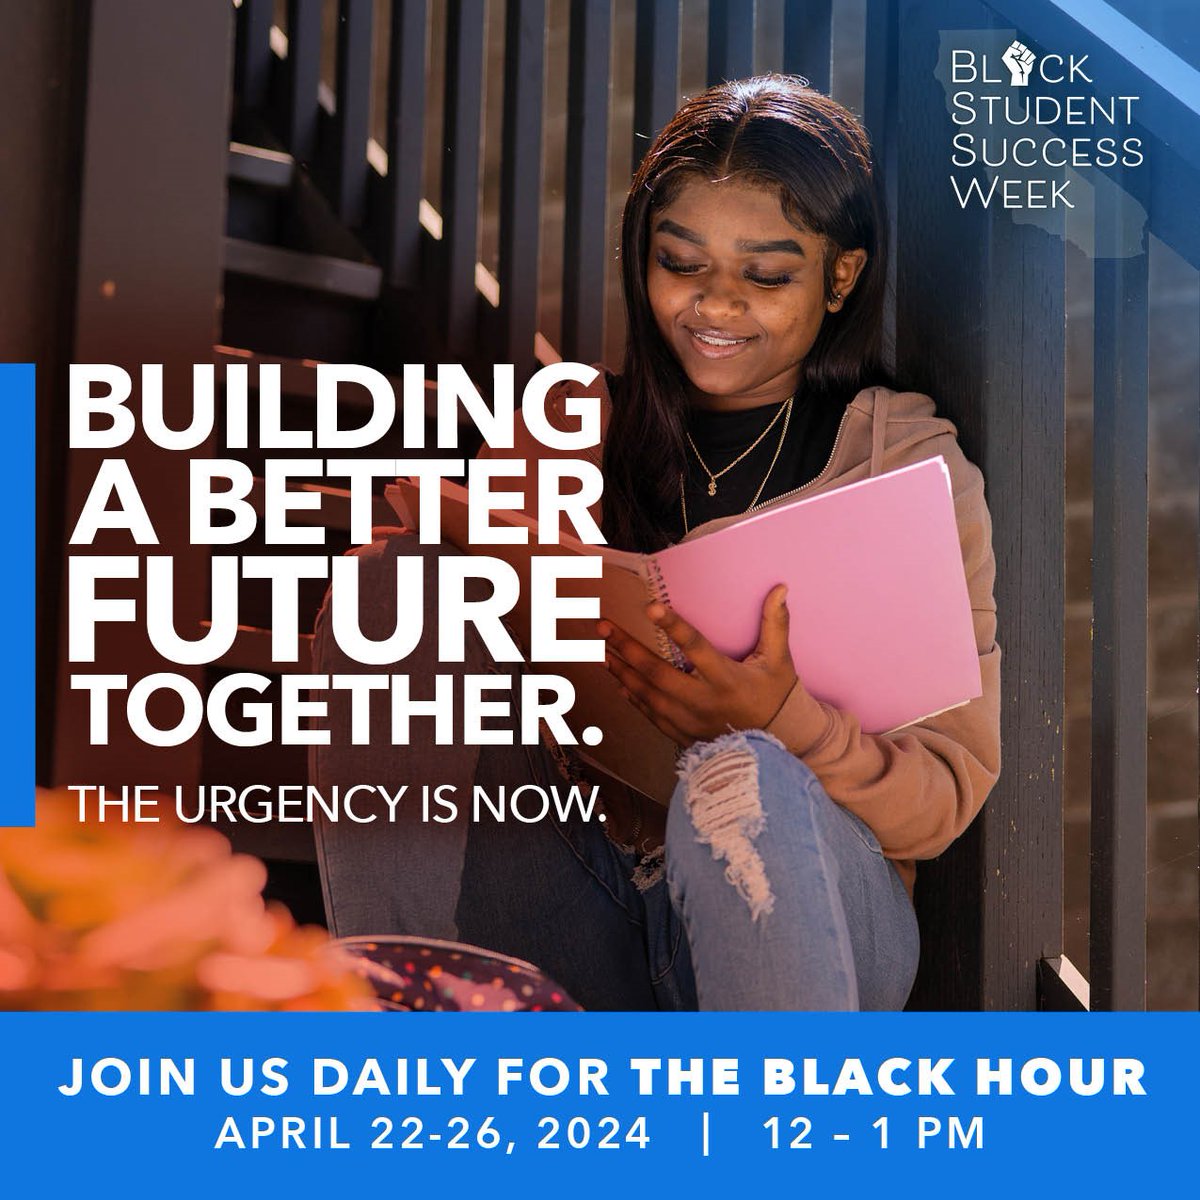 It is #BlackStudentSuccessWeek! Join TODAY at 12 pm for #TheBlackHour webinar, 'Empowering Black Excellence' and stay for #TheAfterParty discussion at 1 pm.
Register NOW: ow.ly/EL7o50RlJmi

@TheRPGroup is proud to be one of the many partners and supporters for #BSSW24.